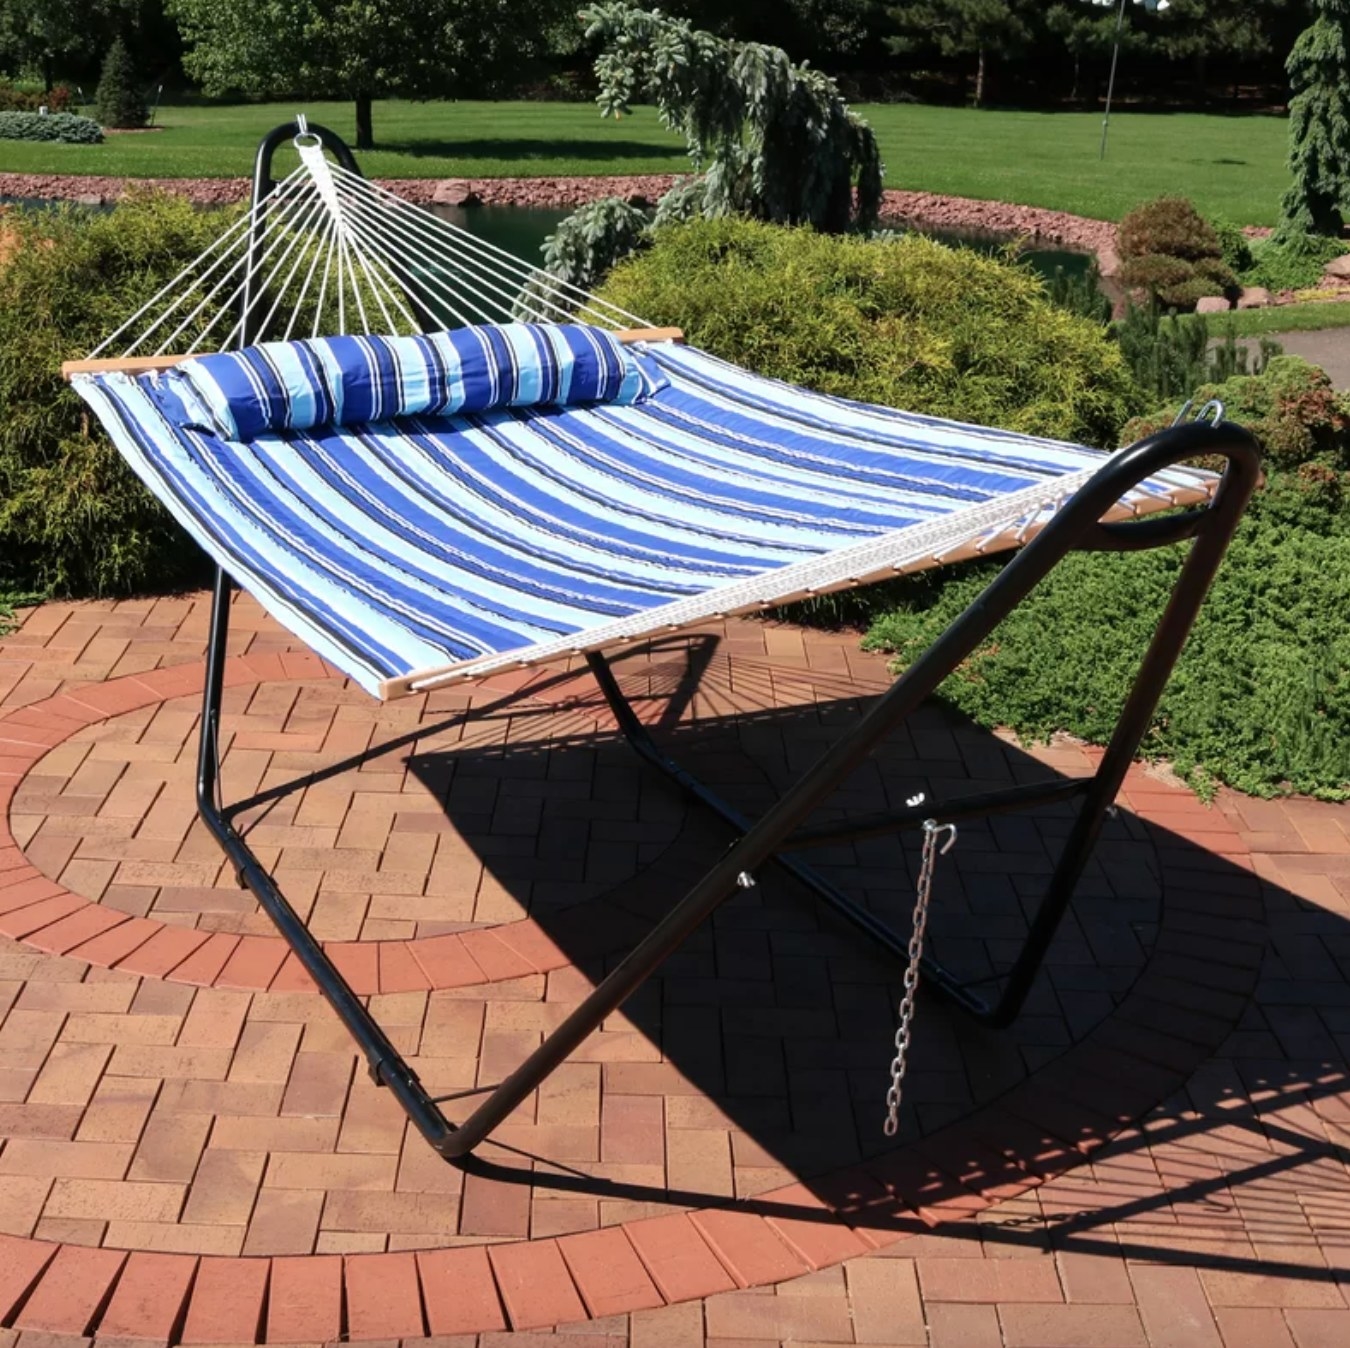 the blue striped hammock on a black metal frame on a brick patio in a garden